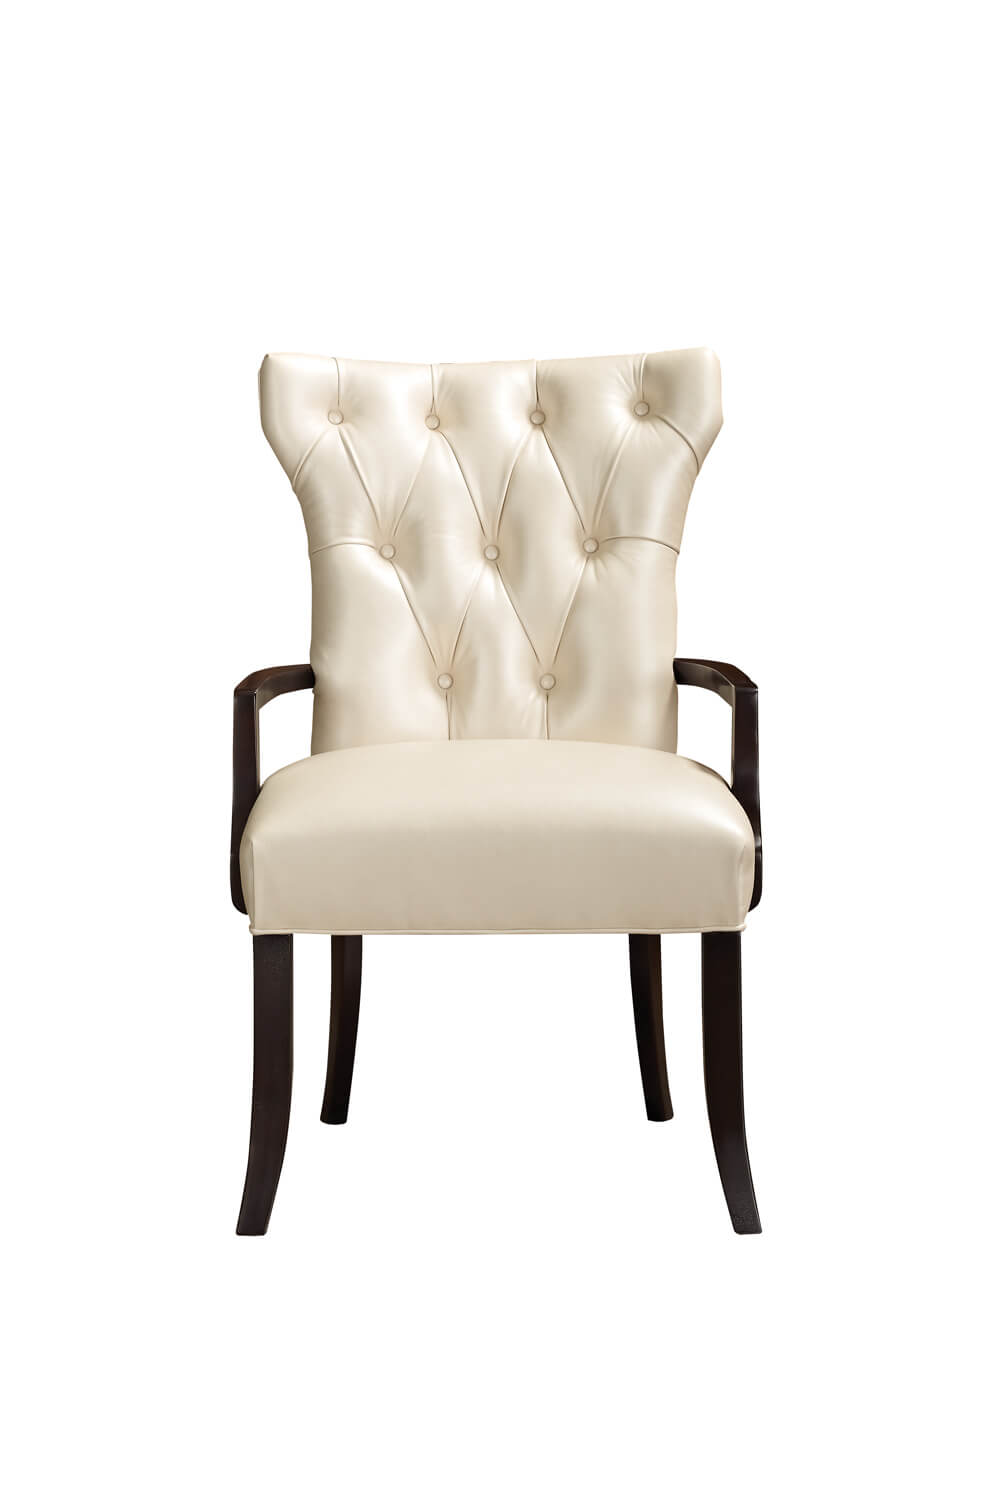 Leathercraft's Davina Wood Dining Arm Chair in Leather - Tufted